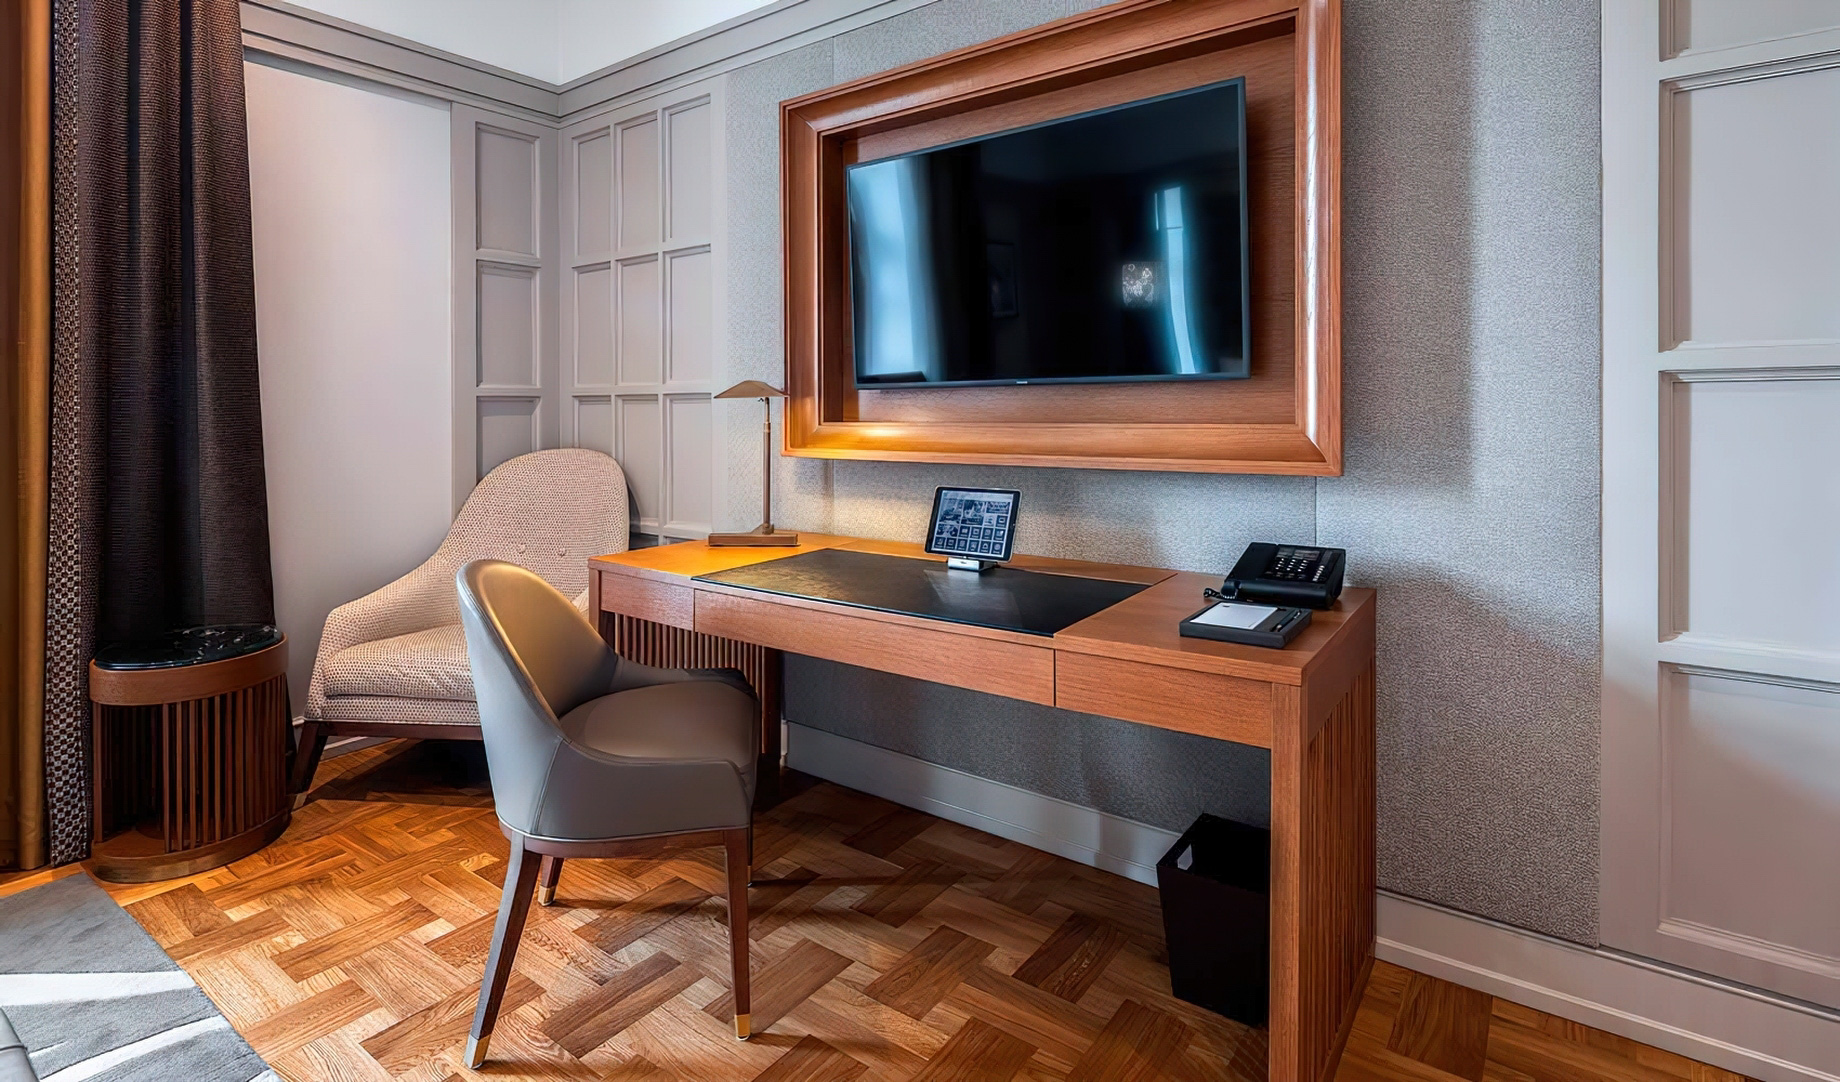 Metropol Hotel Moscow - Moscow, Russia - Executive Room Desk